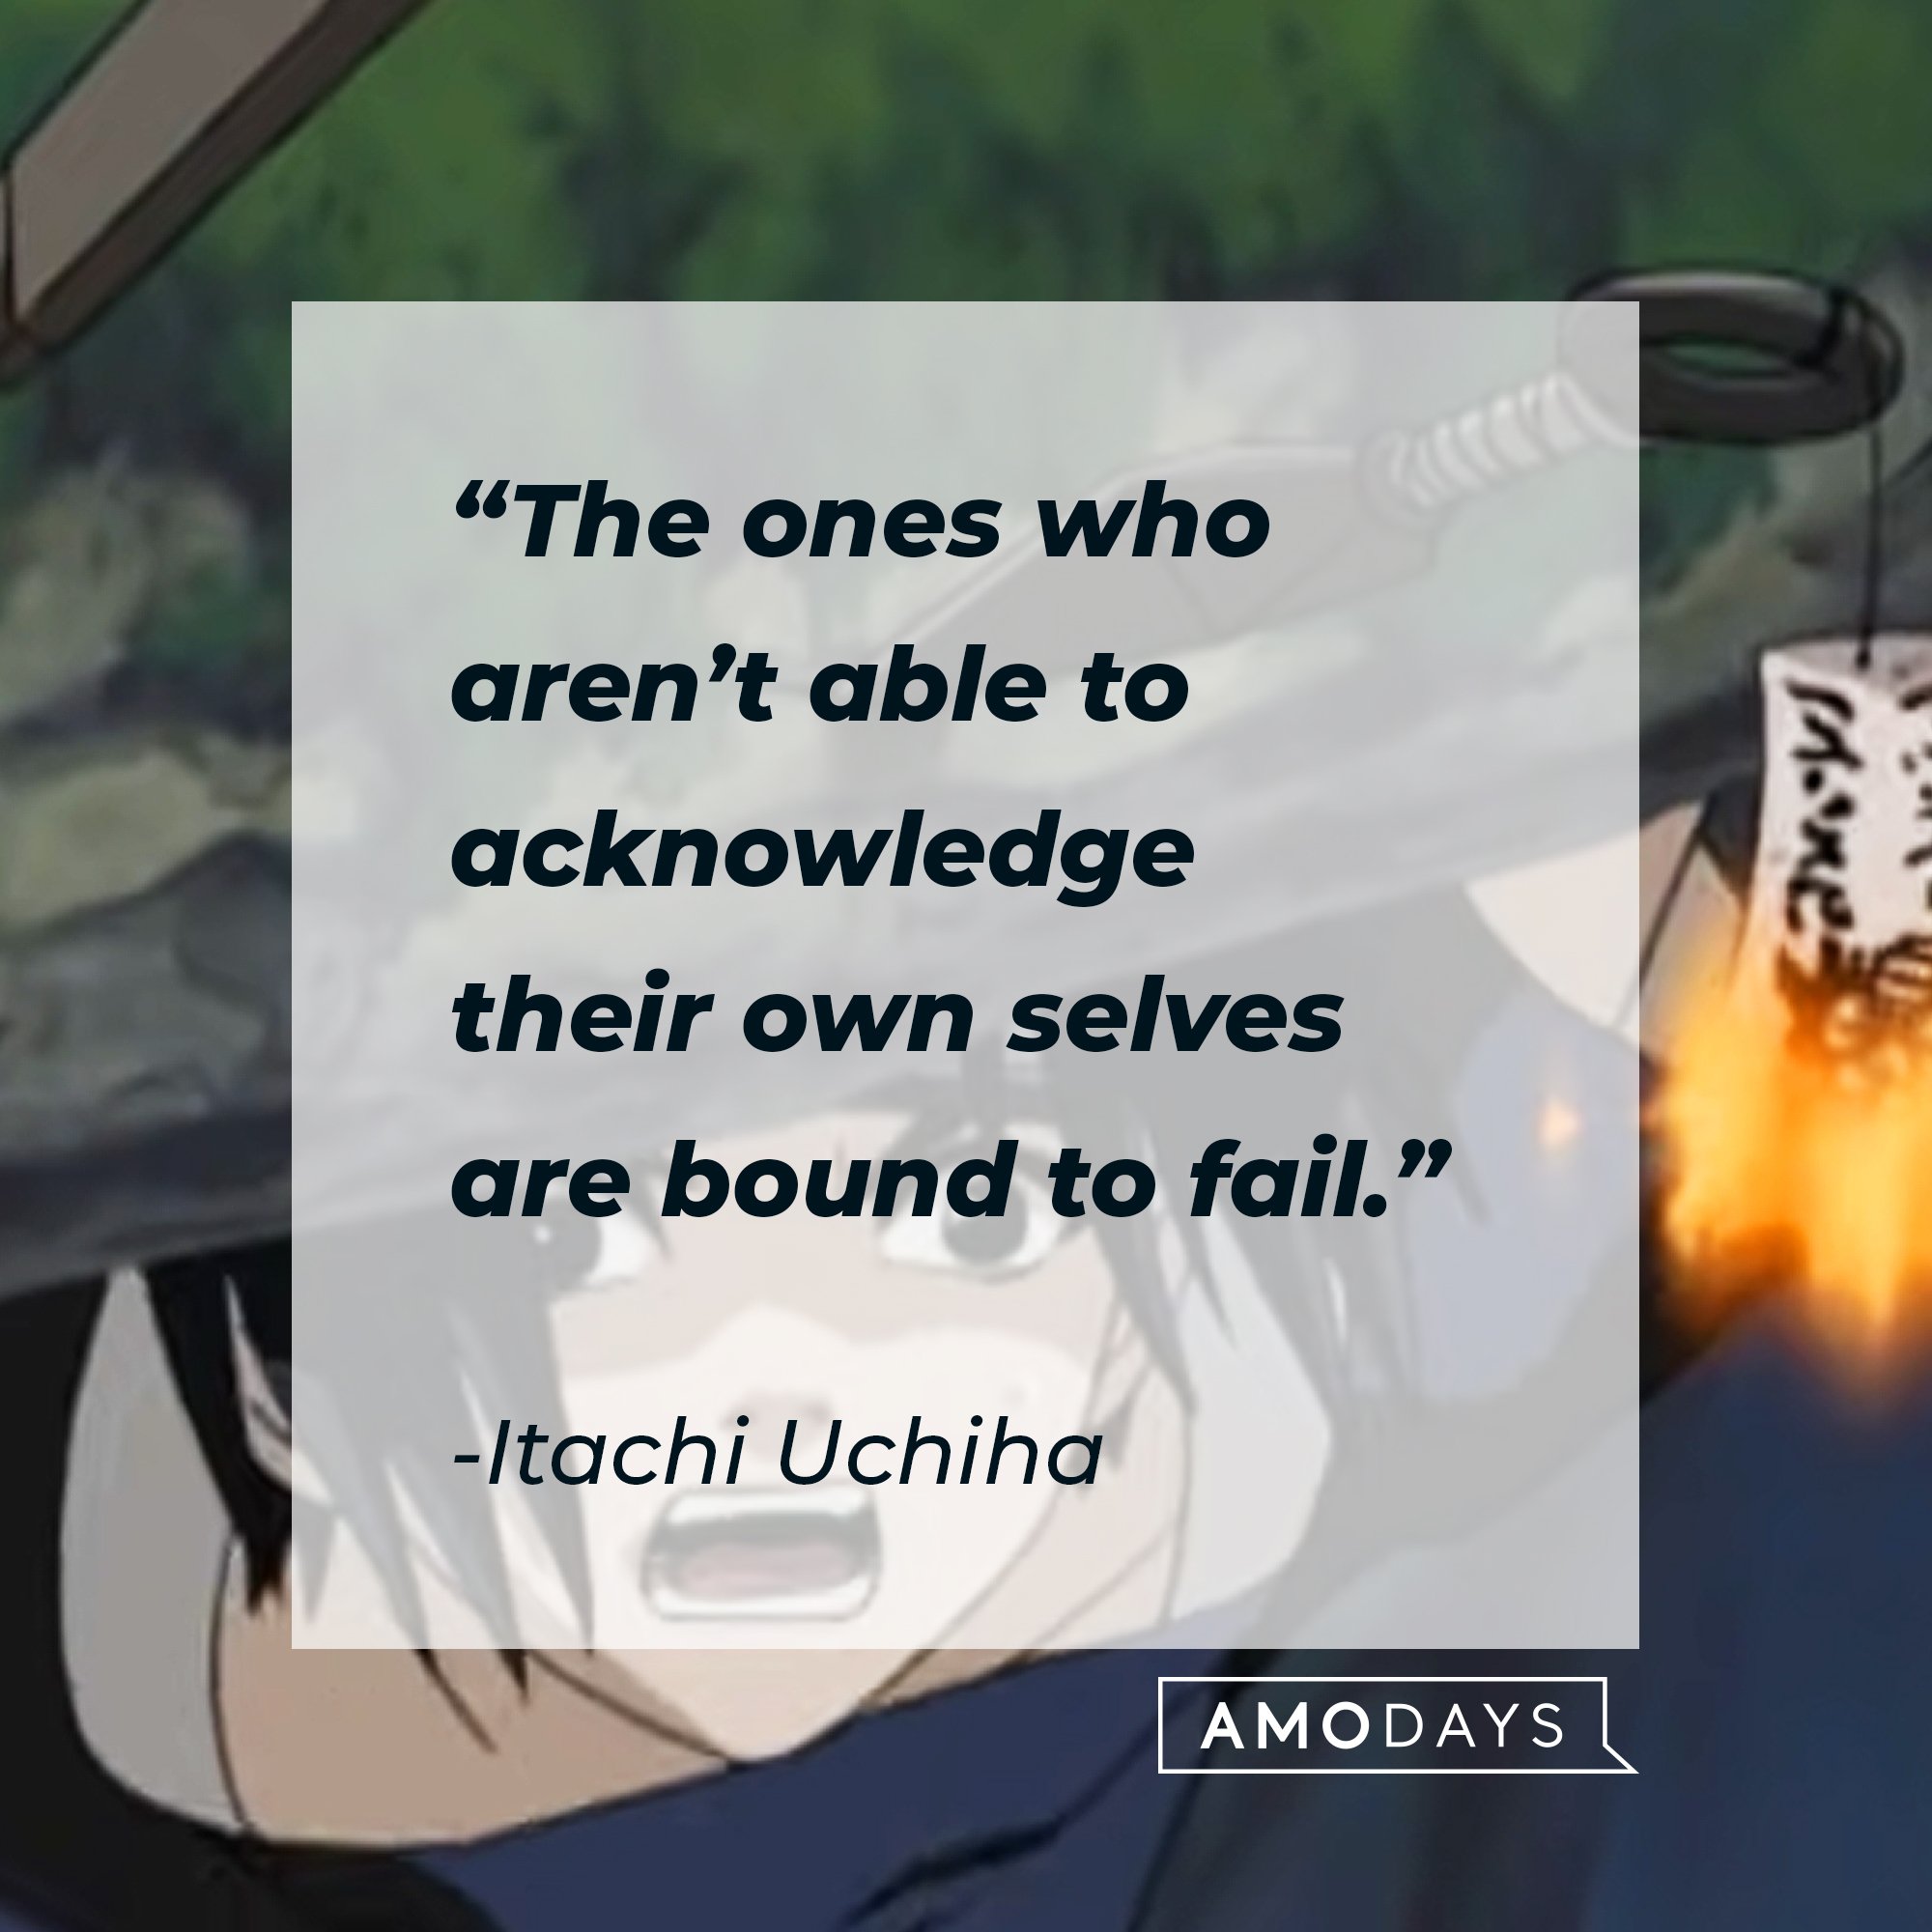 Itachi Uchiha's quote: “The ones who aren’t able to acknowledge their own selves are bound to fail.” | Image: AmoDays 